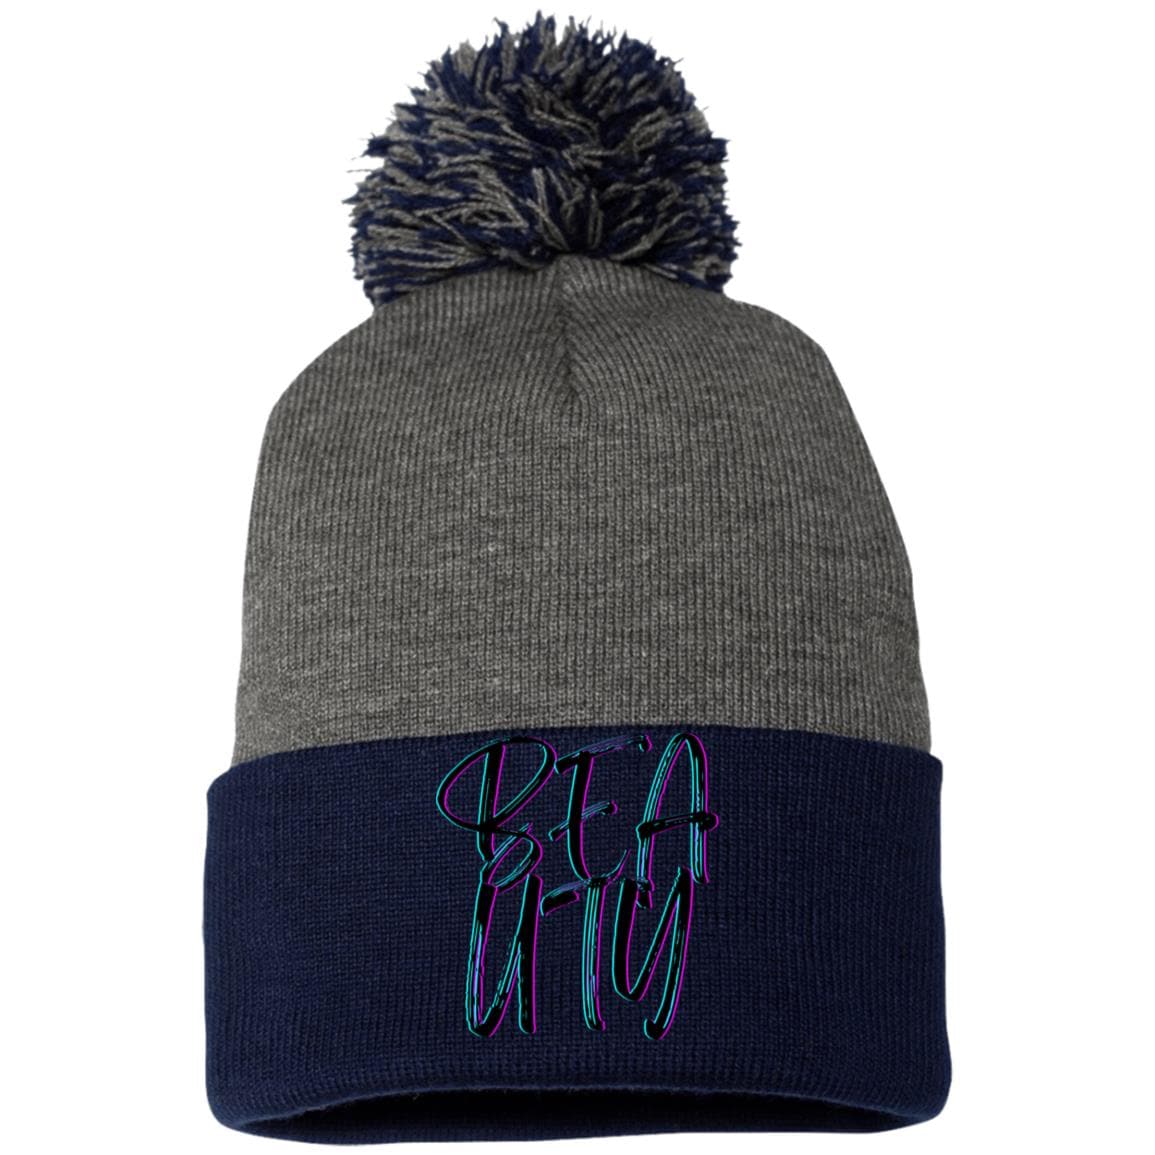 Navy Dark Heather One Size - Beauty Embroidered Pom Pom Knit Cap - Hats at TFC&H Co.